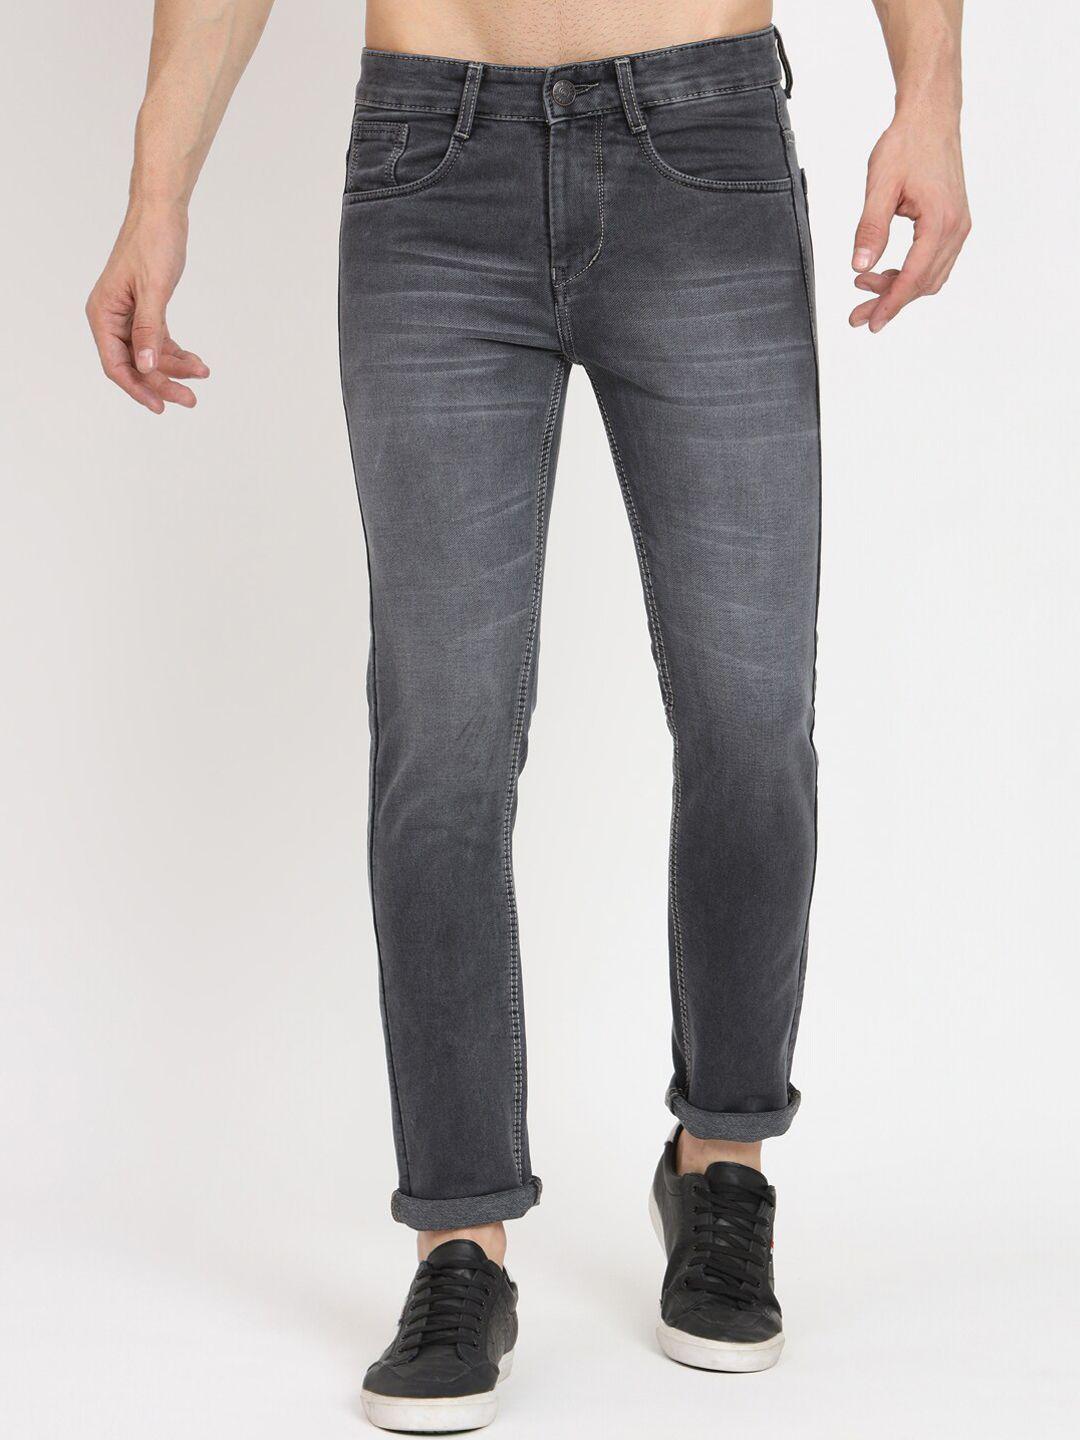 ragzo-men-slim-fit-low-rise-light-fade-stretchable-jeans